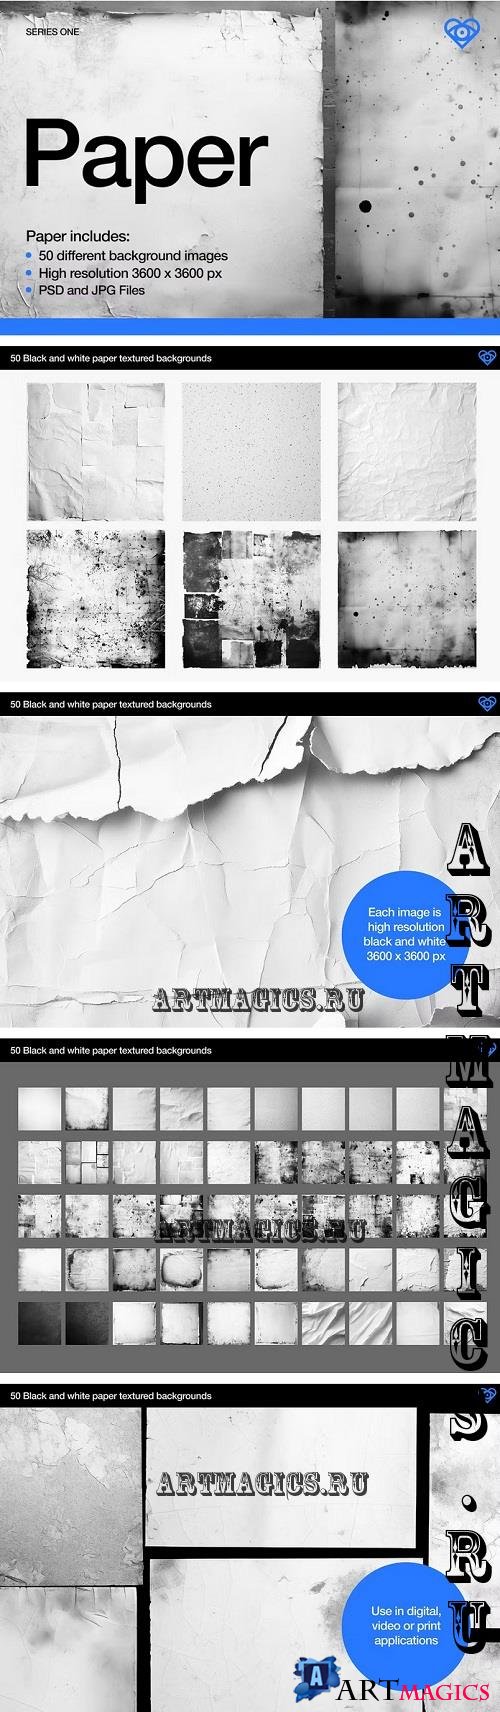 Paper - 50 Black & White Backgrounds - 92088751